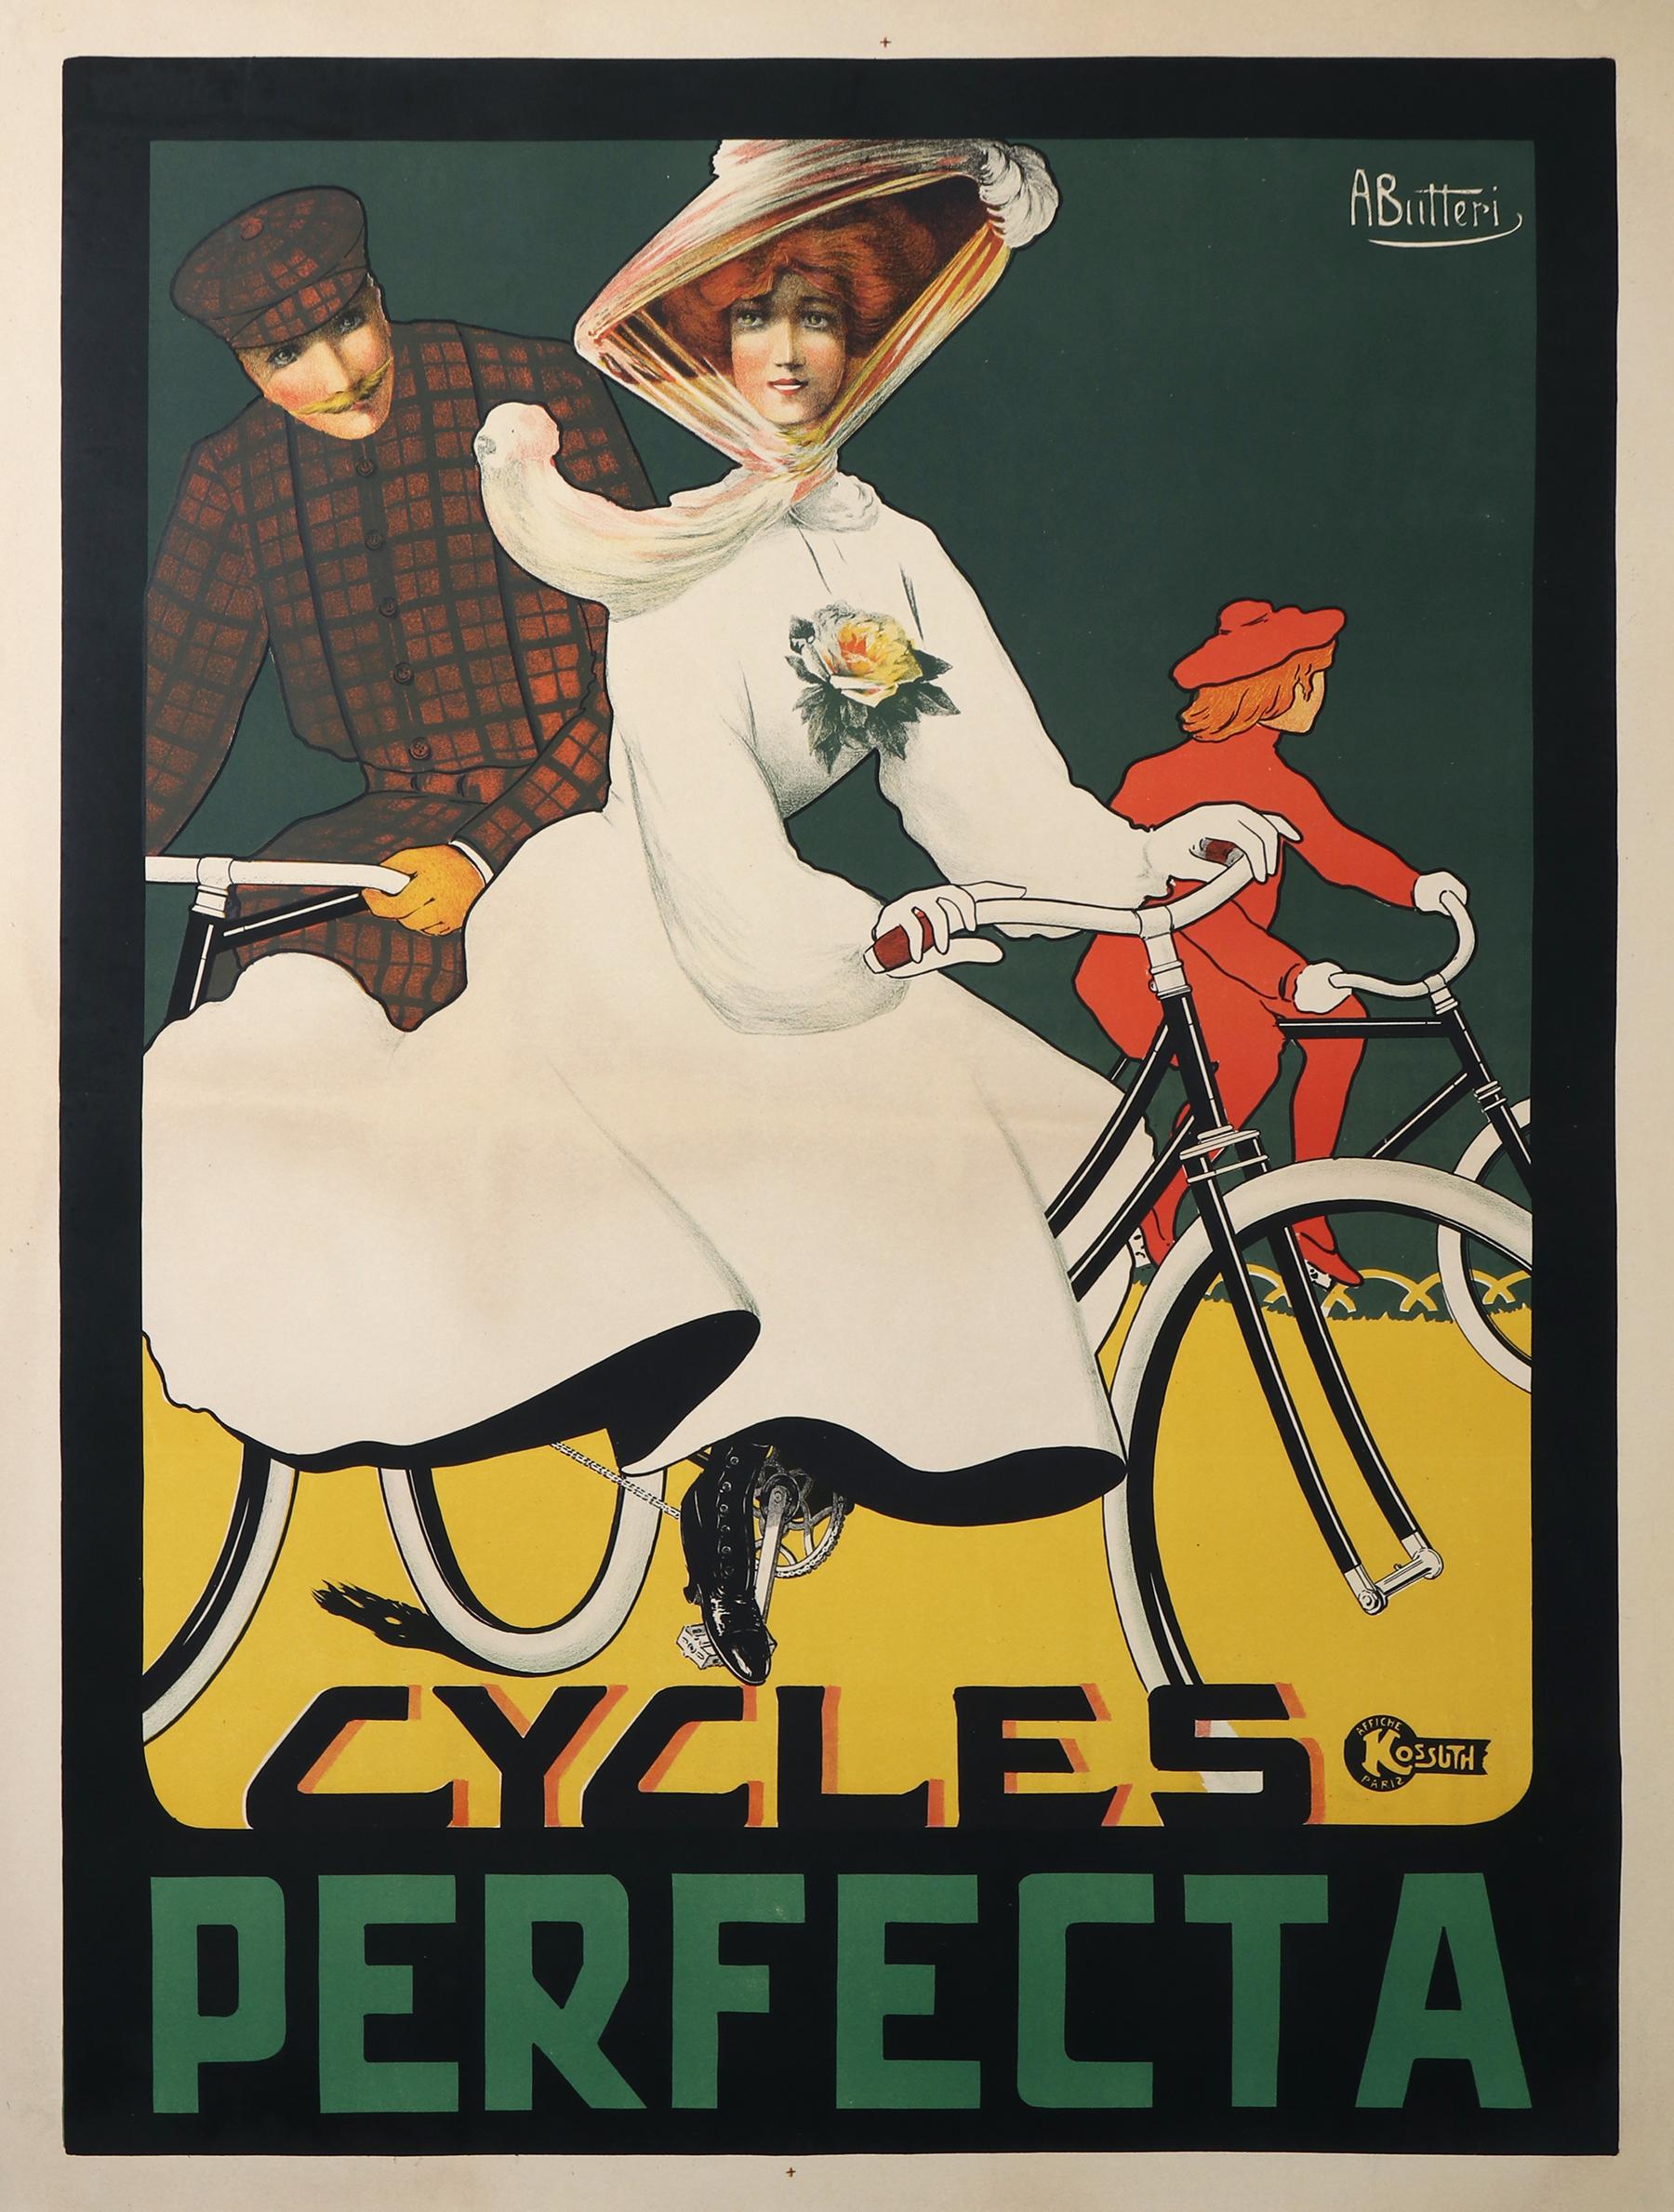 Clever design is on display in this Art Nouveau poster for Cycles Perfecta by Achille Butteri. Each member of this dapper cycling family looks in a different direction, and as viewers we're forced to focus first on the bicycle at the center. It is